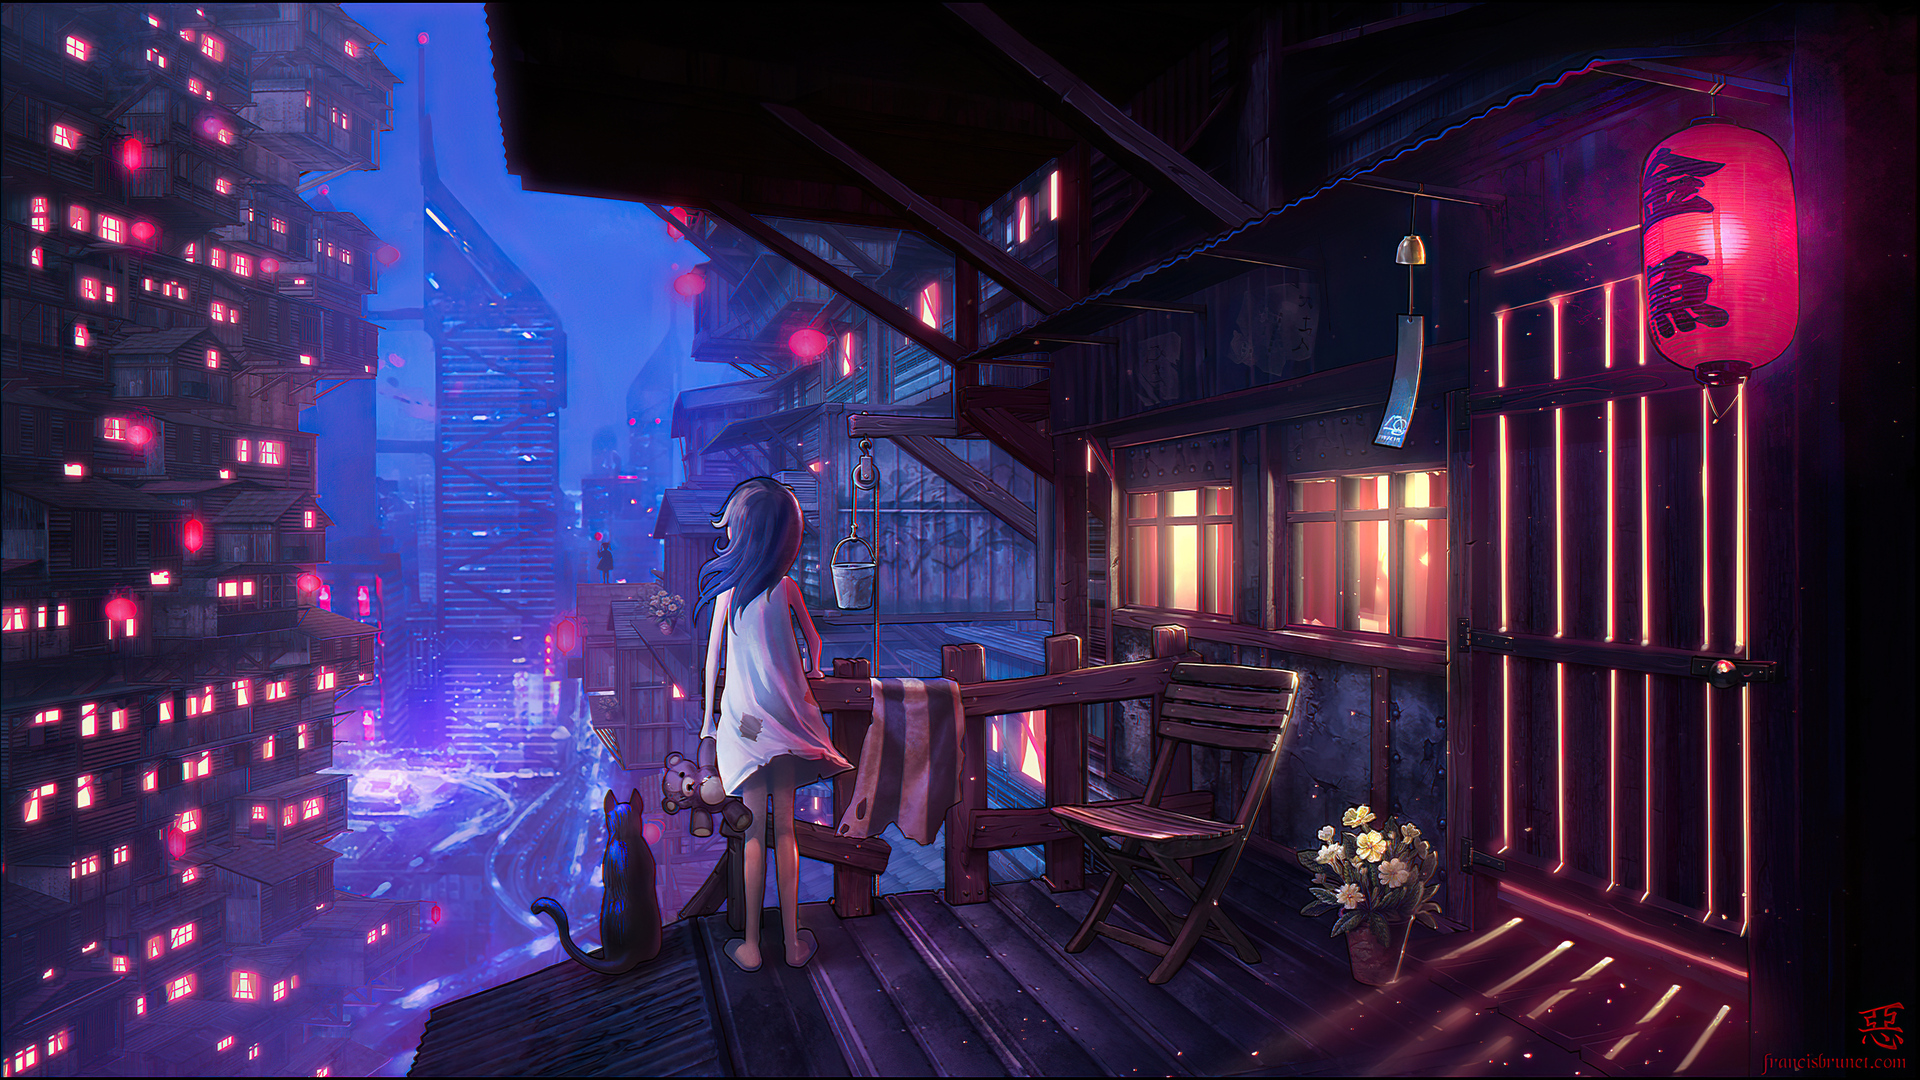 Premium Photo | Cute anime woman looking at the cityscape by night time a  sad moody manga lofi style 3d rendering